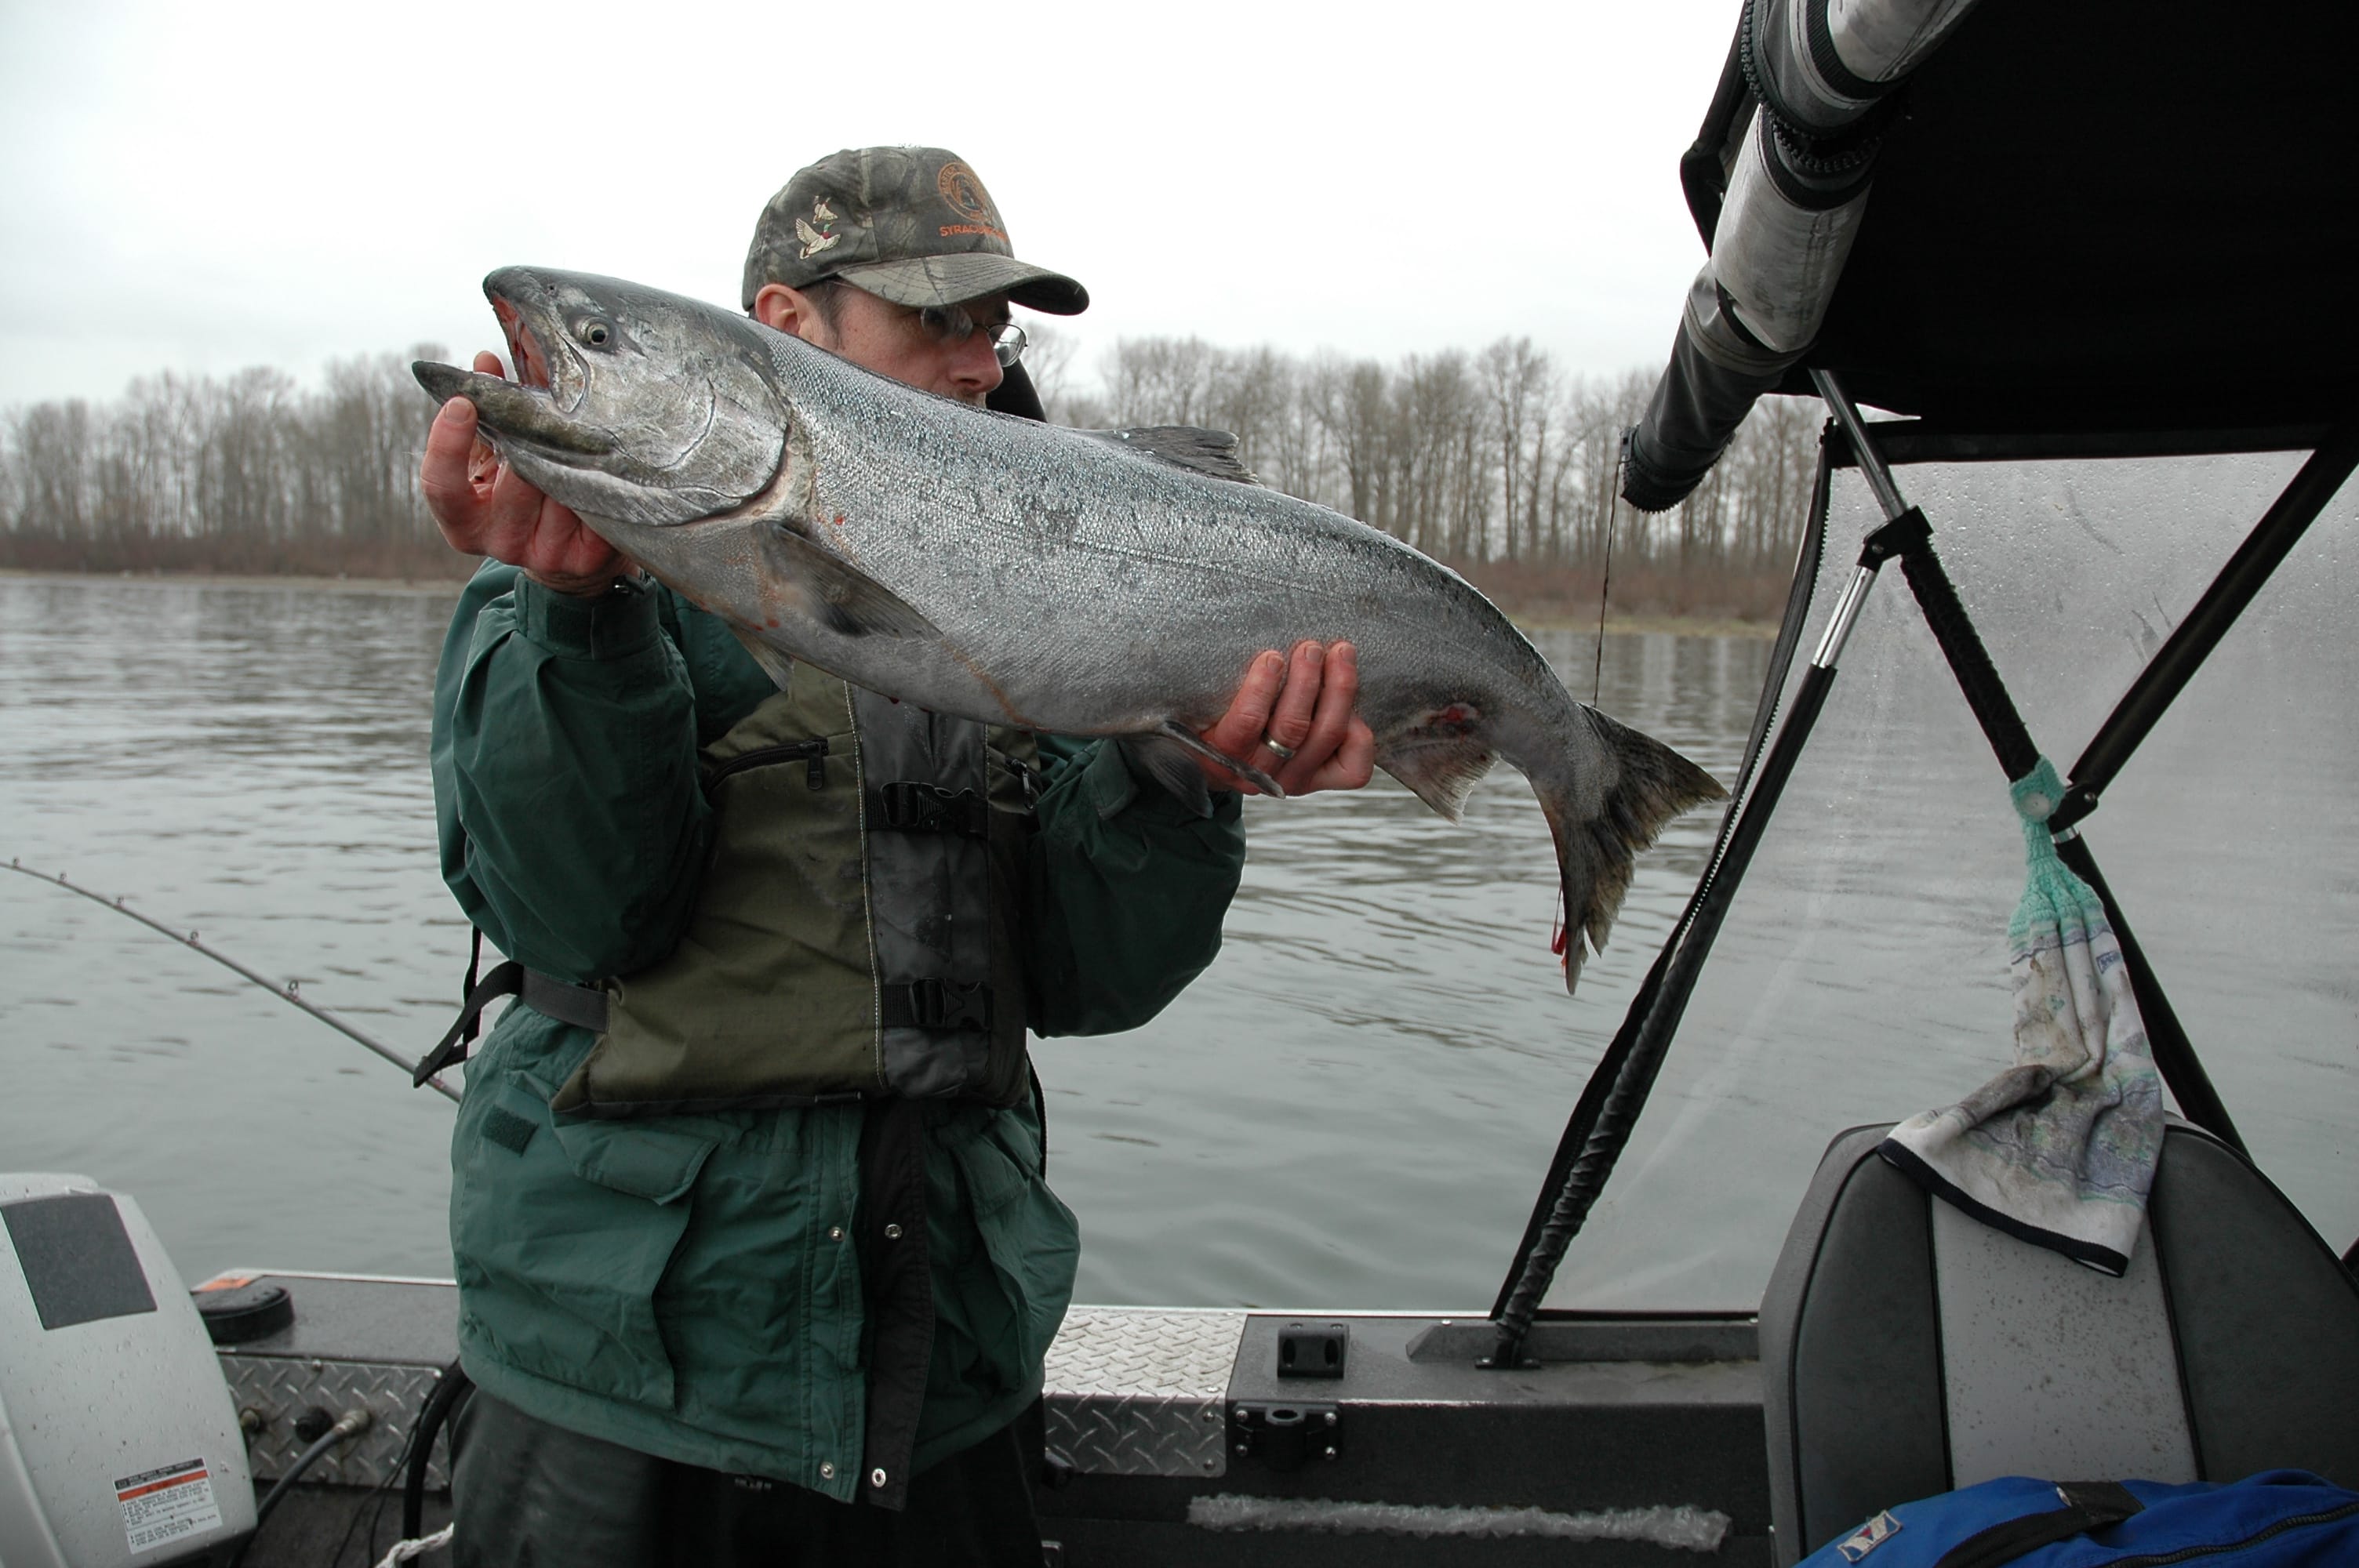 Spring chinook caught in the lower Columbia River are considered among the finest eating salmon in the world.